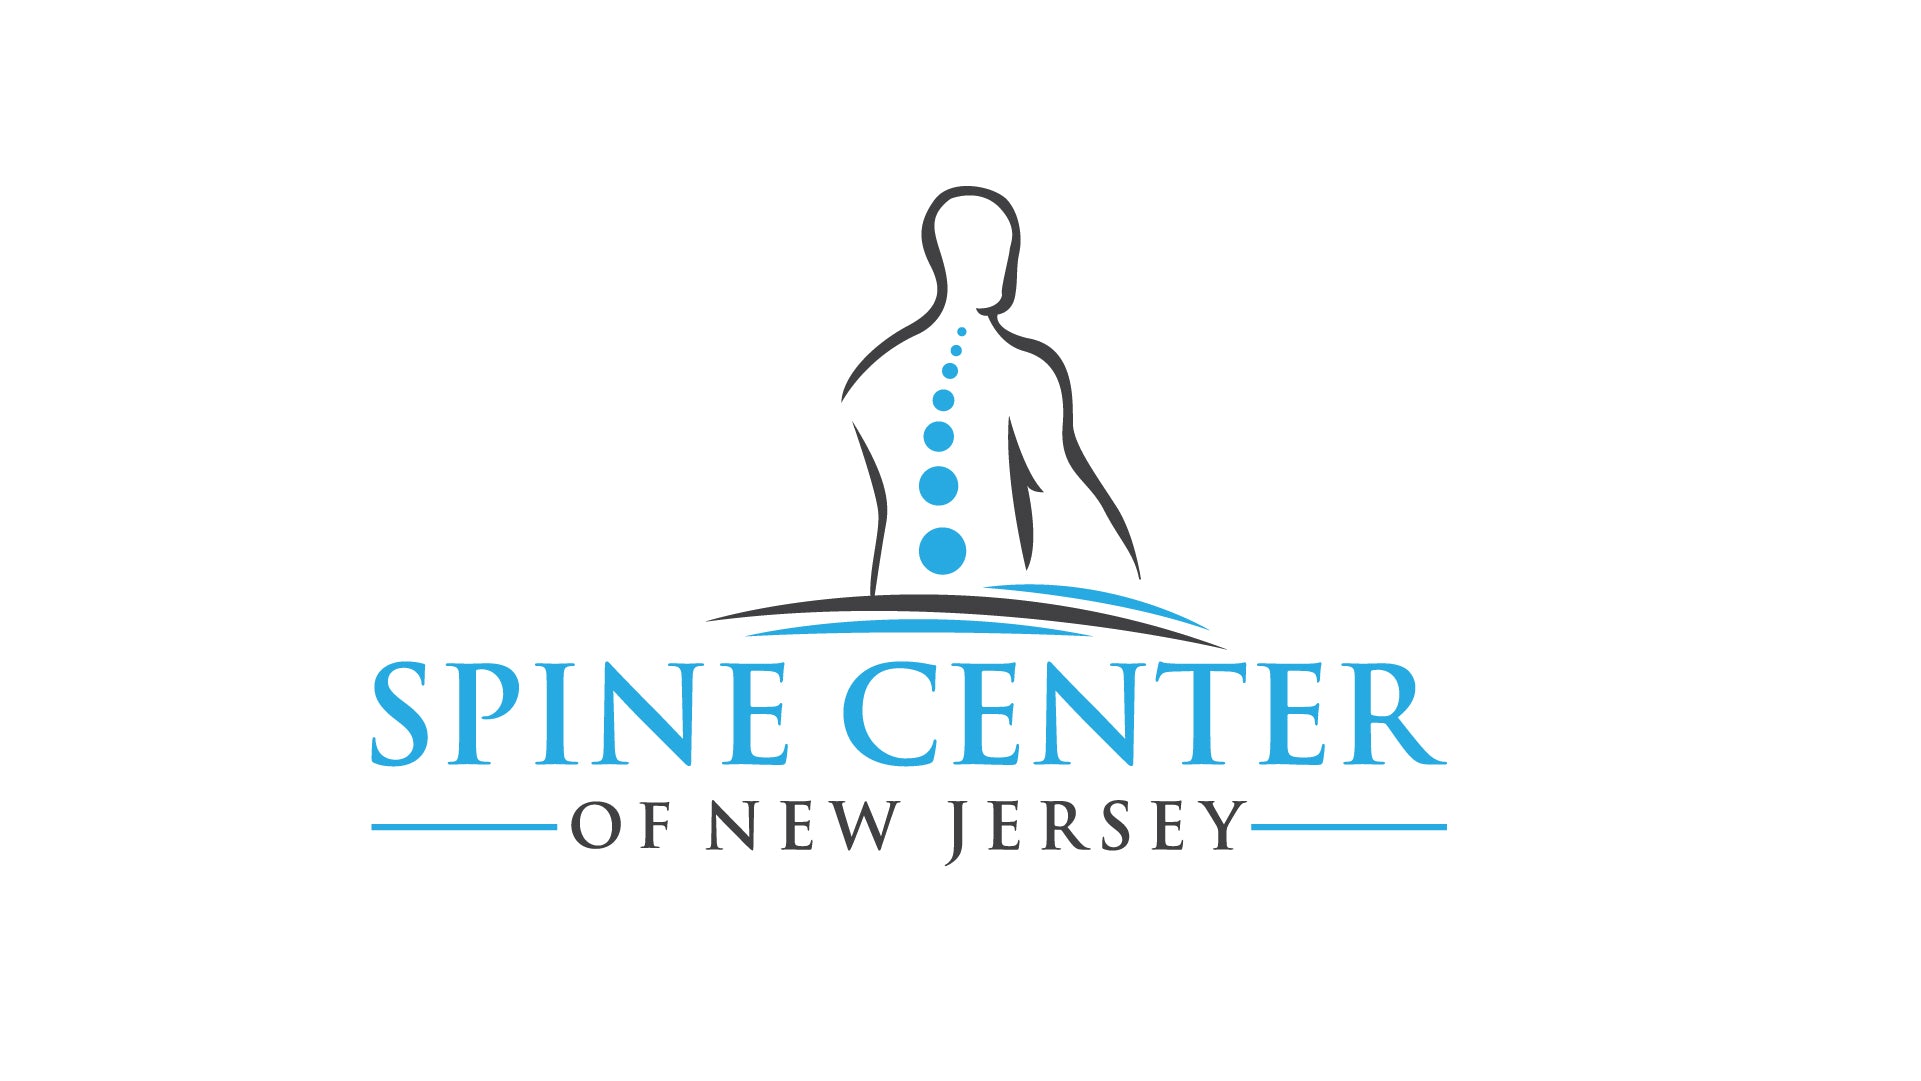 One exam, 10 Adjustments - Premium  from Spine Center of New Jersey - Just $294.99! Shop now at Spine Center of New Jersey